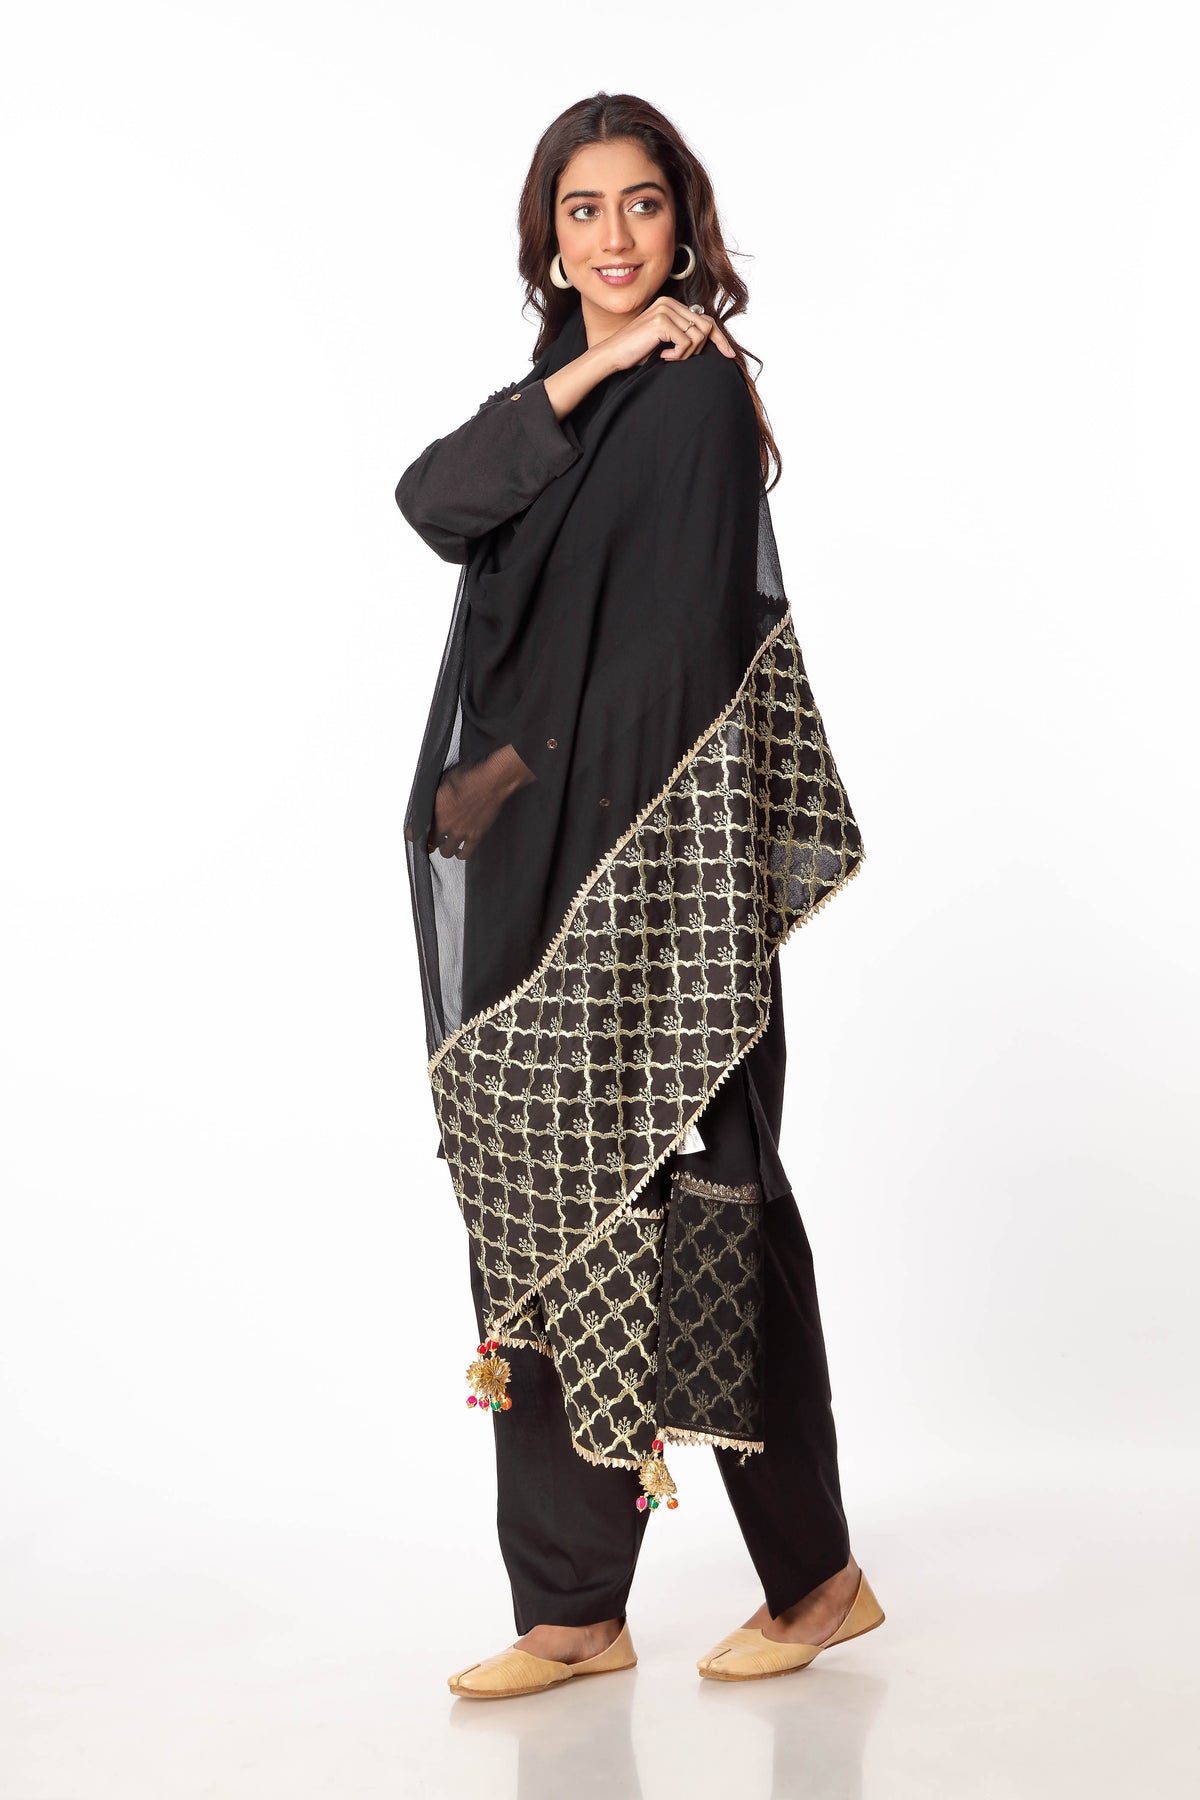 Tilla Jaal in Black coloured Printed Lawn fabric